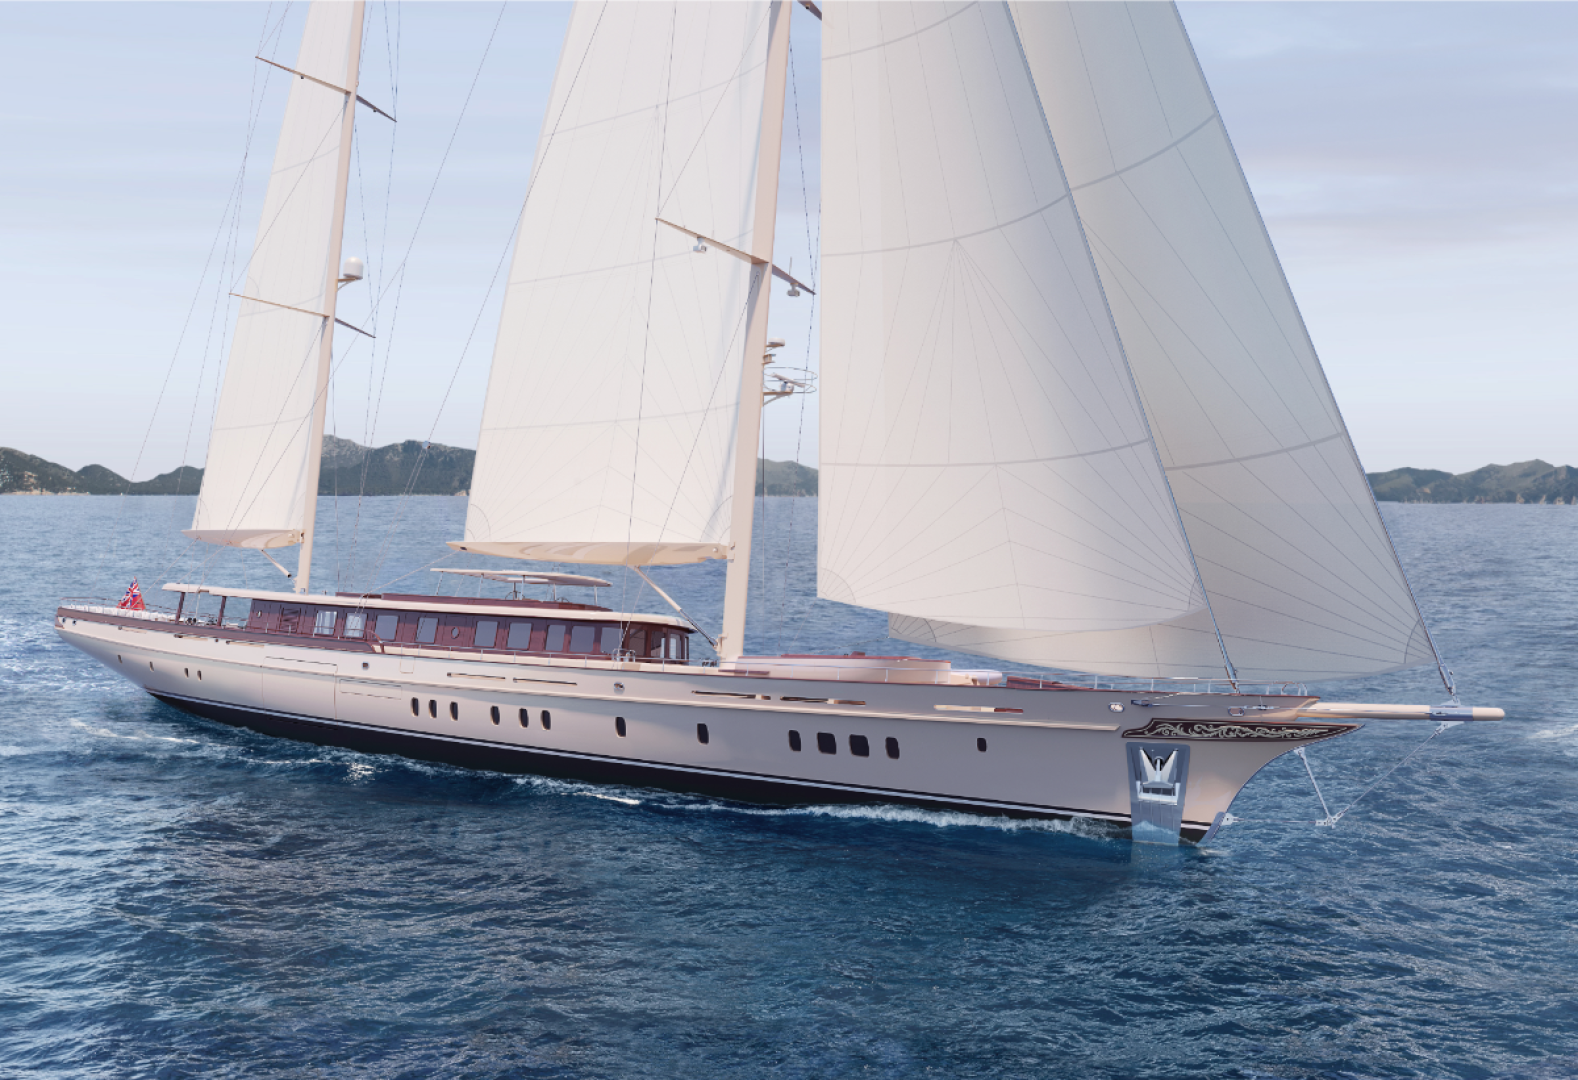 Design details of hotly anticipated Ares Yachts 62m ketch Simena revealed